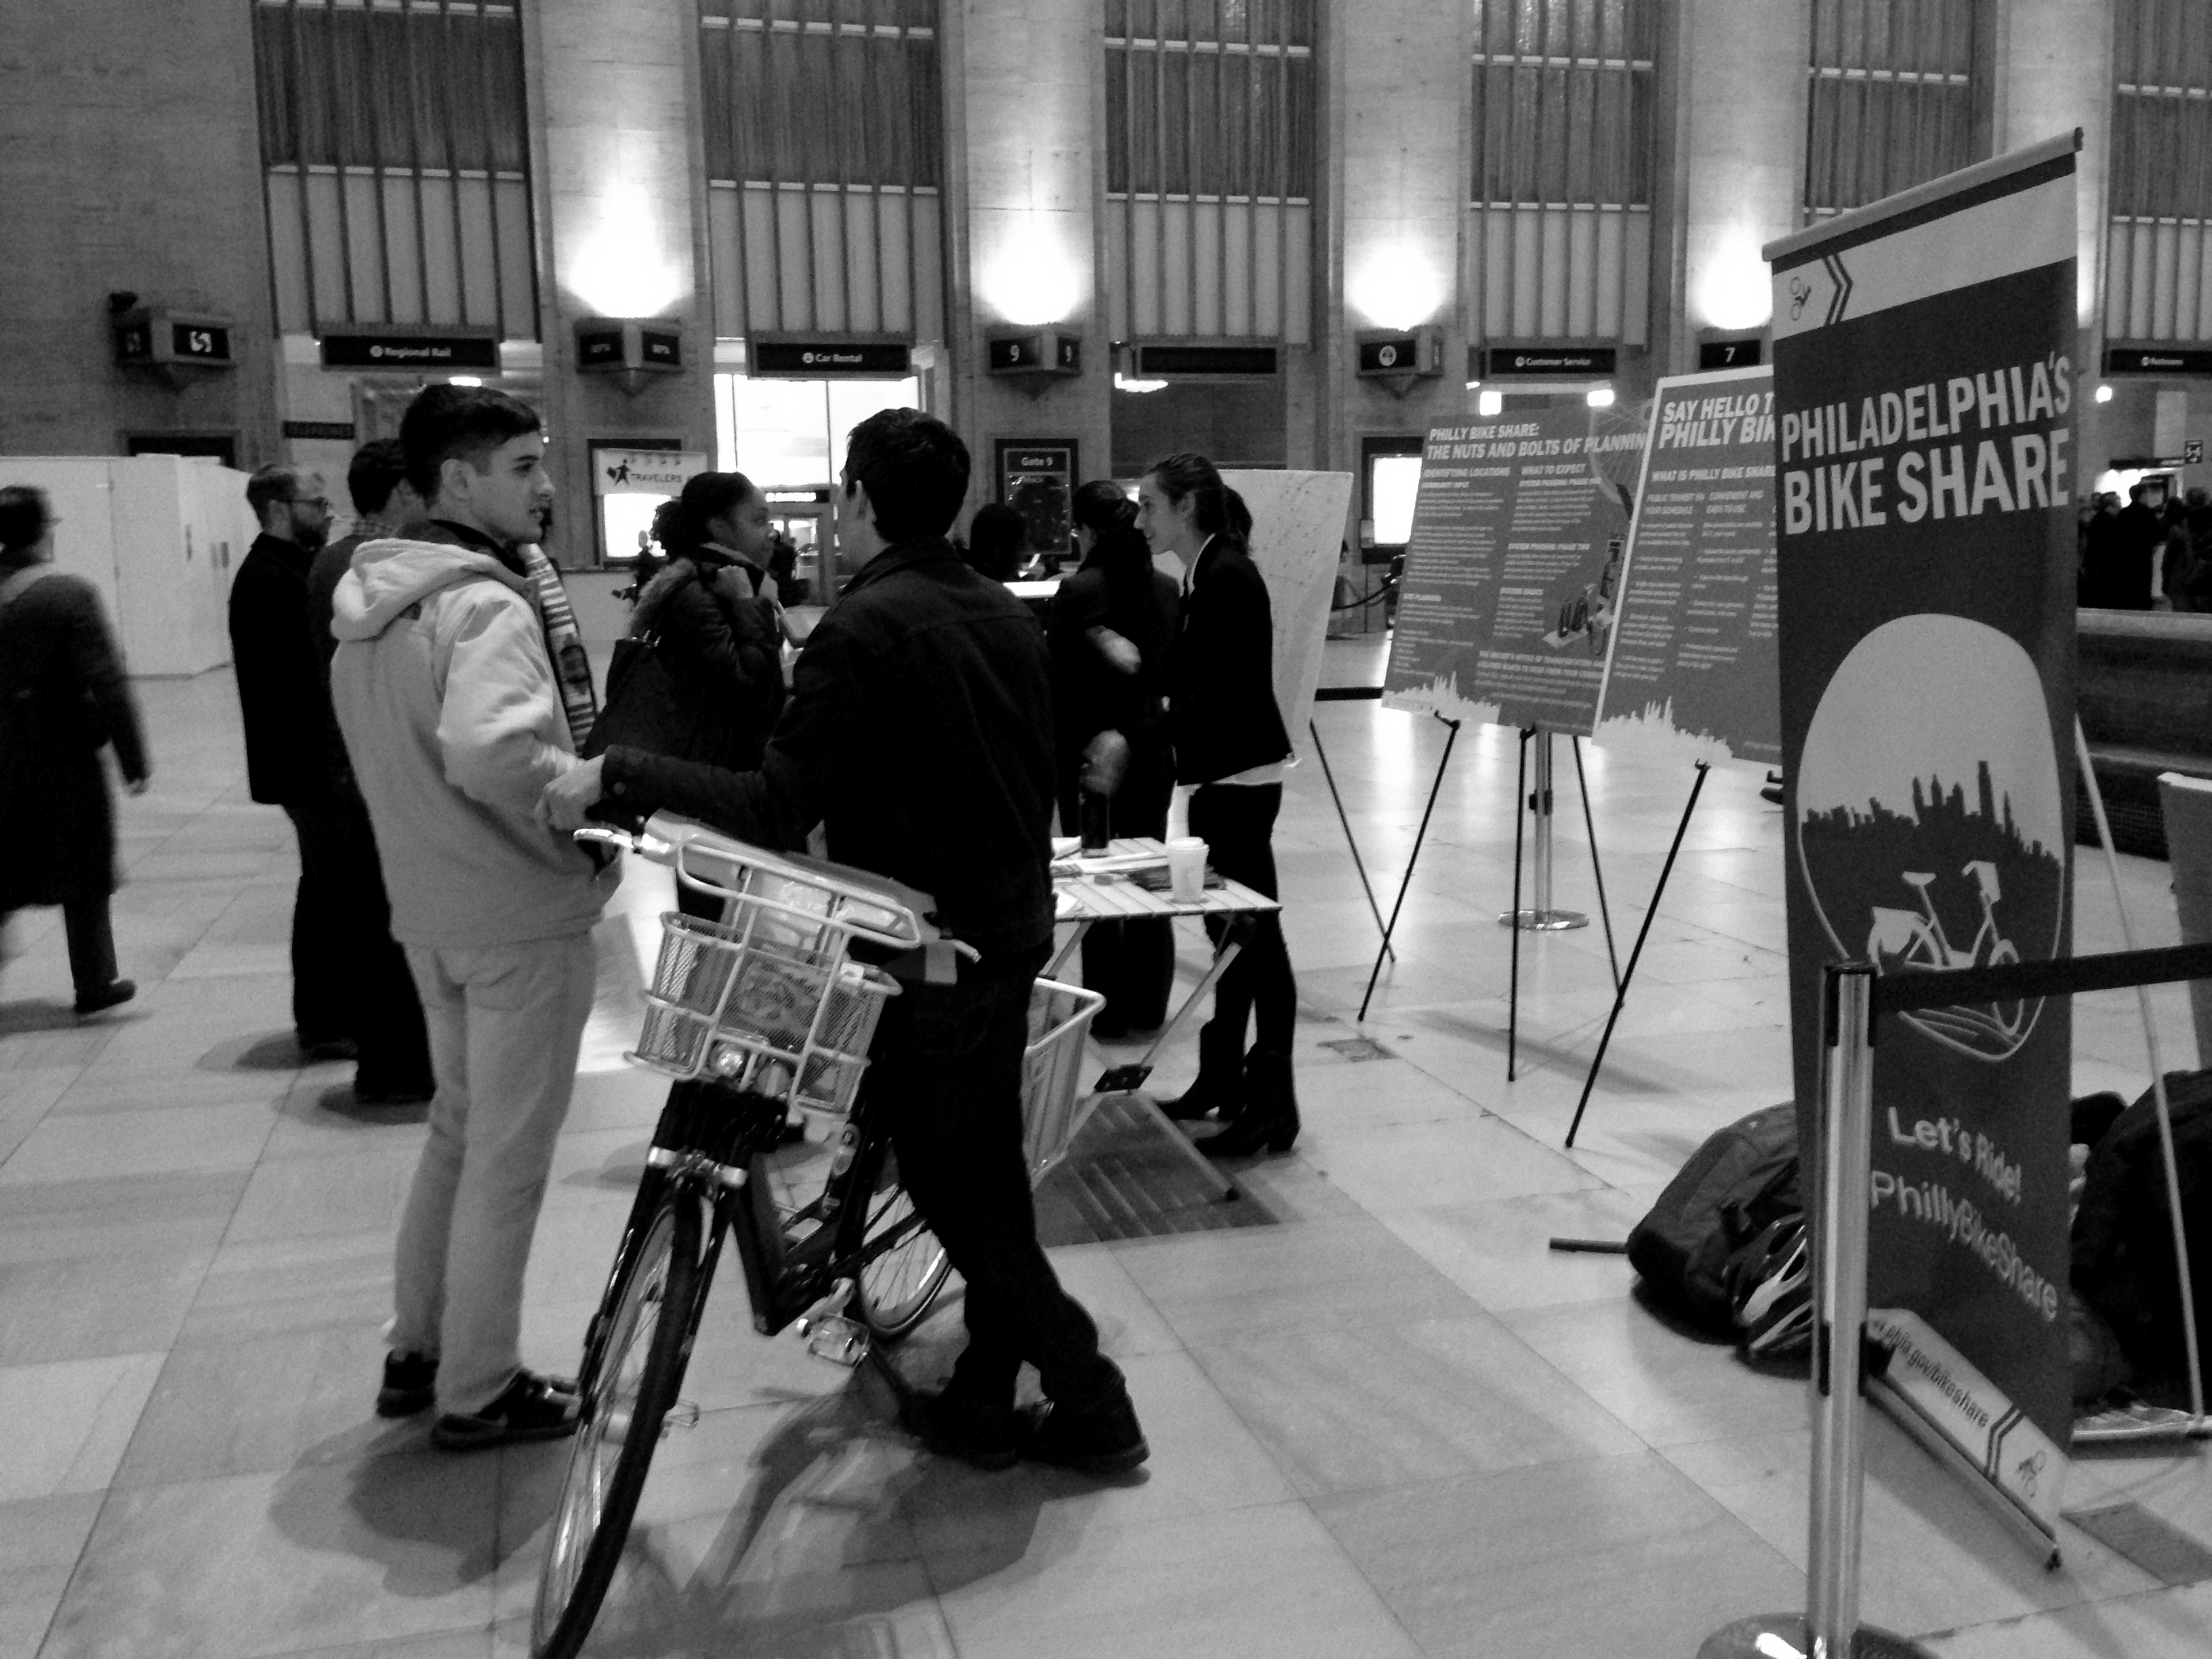 Philly Bike Share open house at 30th Street Station, November 2014